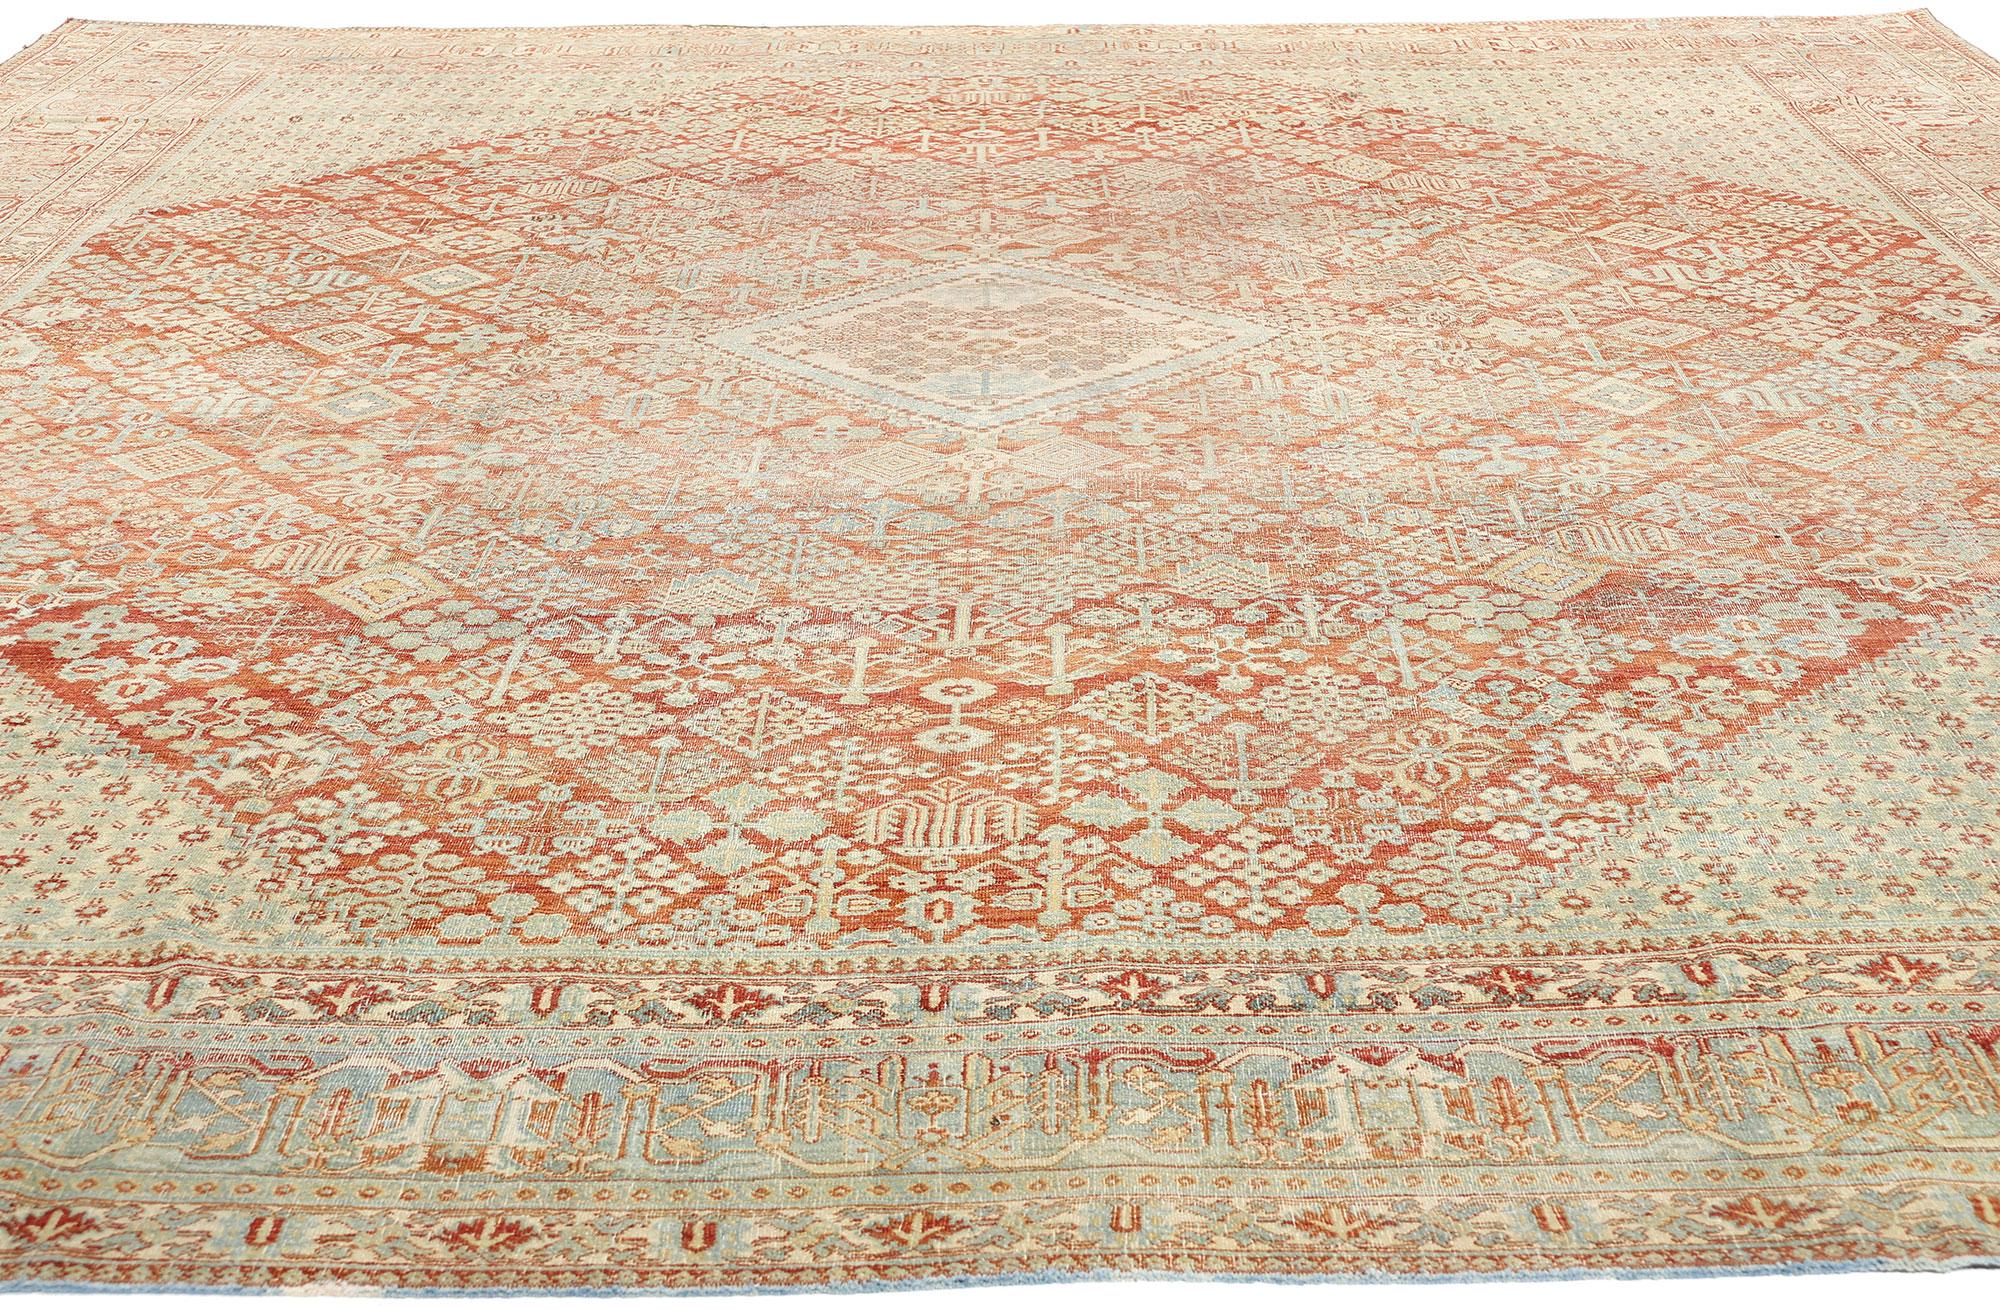 Hand-Knotted Distressed Antique Persian Joshegan Rug, 10'11 x 12'10 For Sale